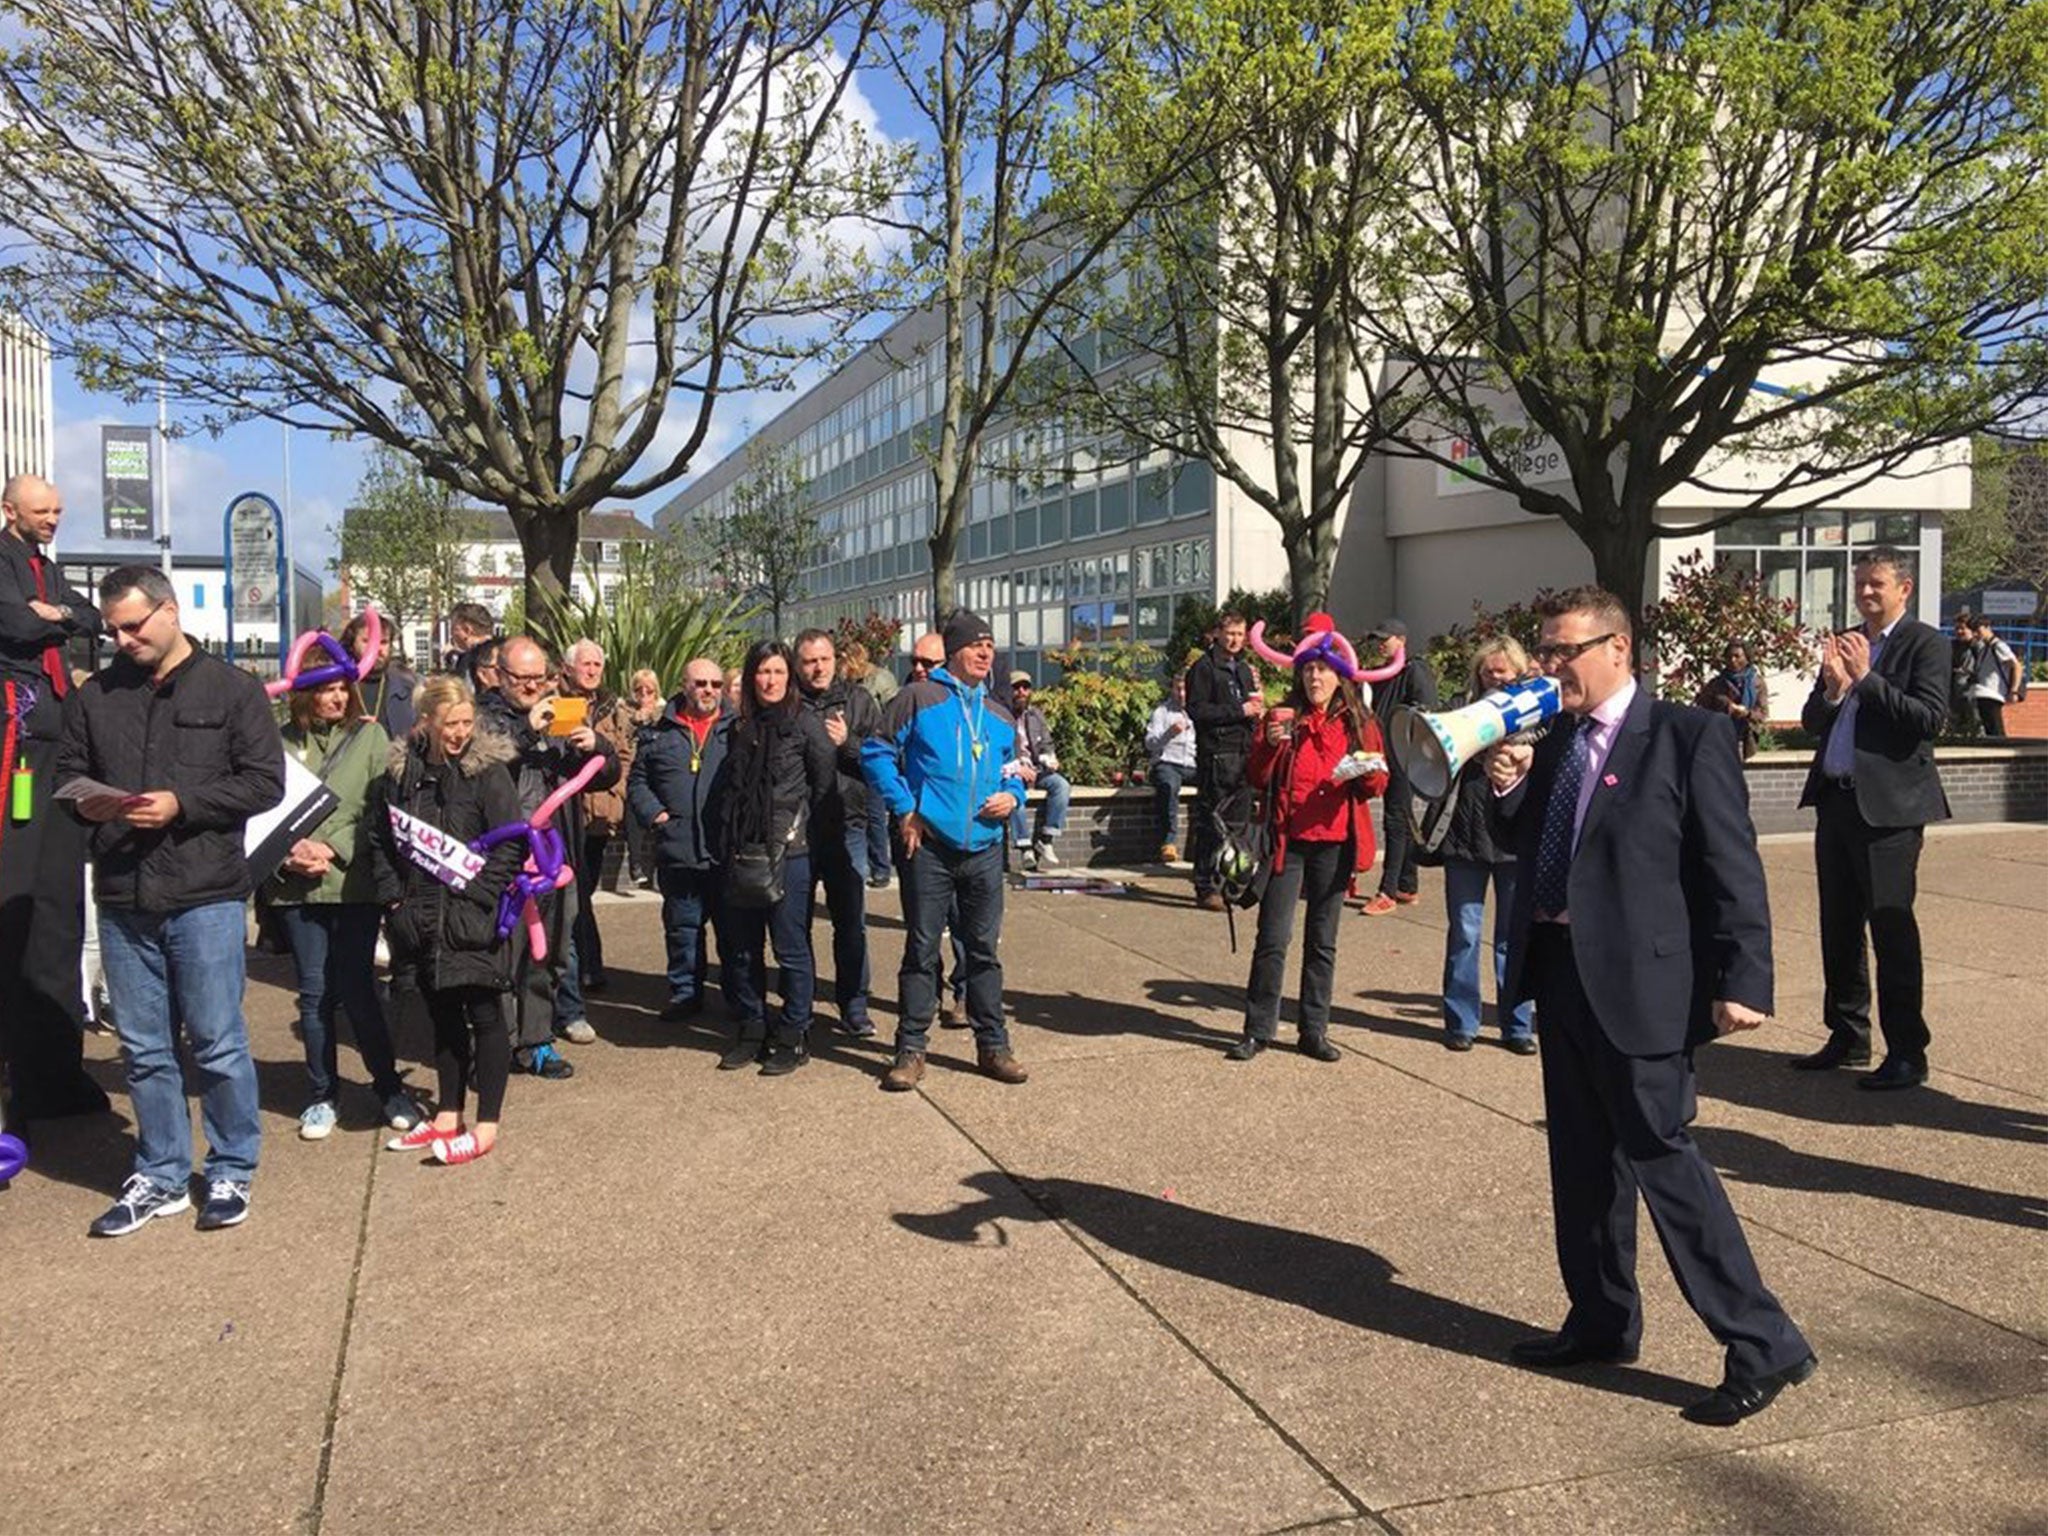 Karl Turner addressed staff at a UCU strike over pay on Tuesday